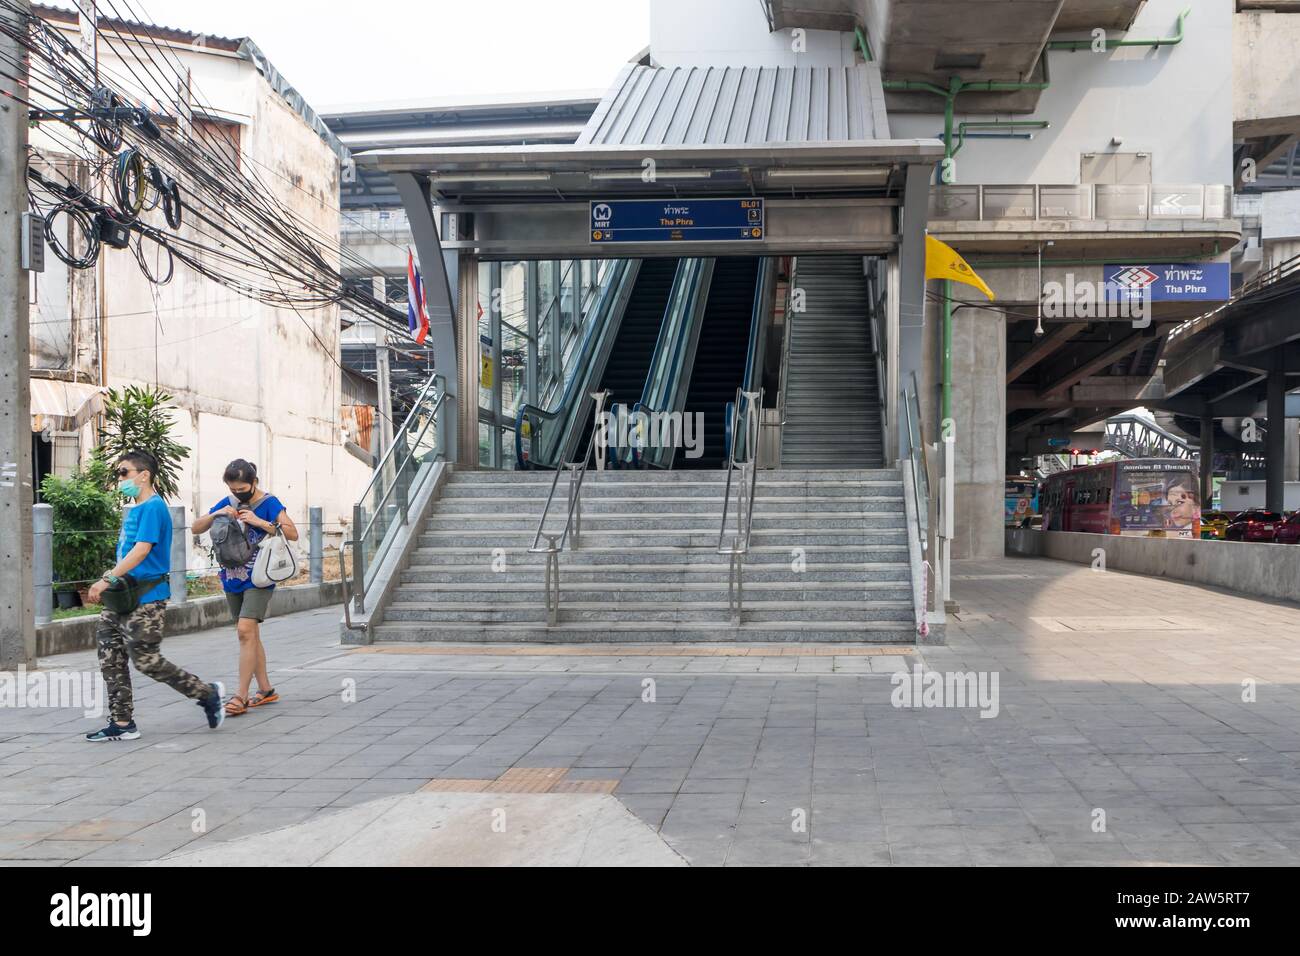 Bangkok, Thailand - January 11th 2020: People leaving Tha Phra MRT station. This is one of the newest stations to be opened. Stock Photo